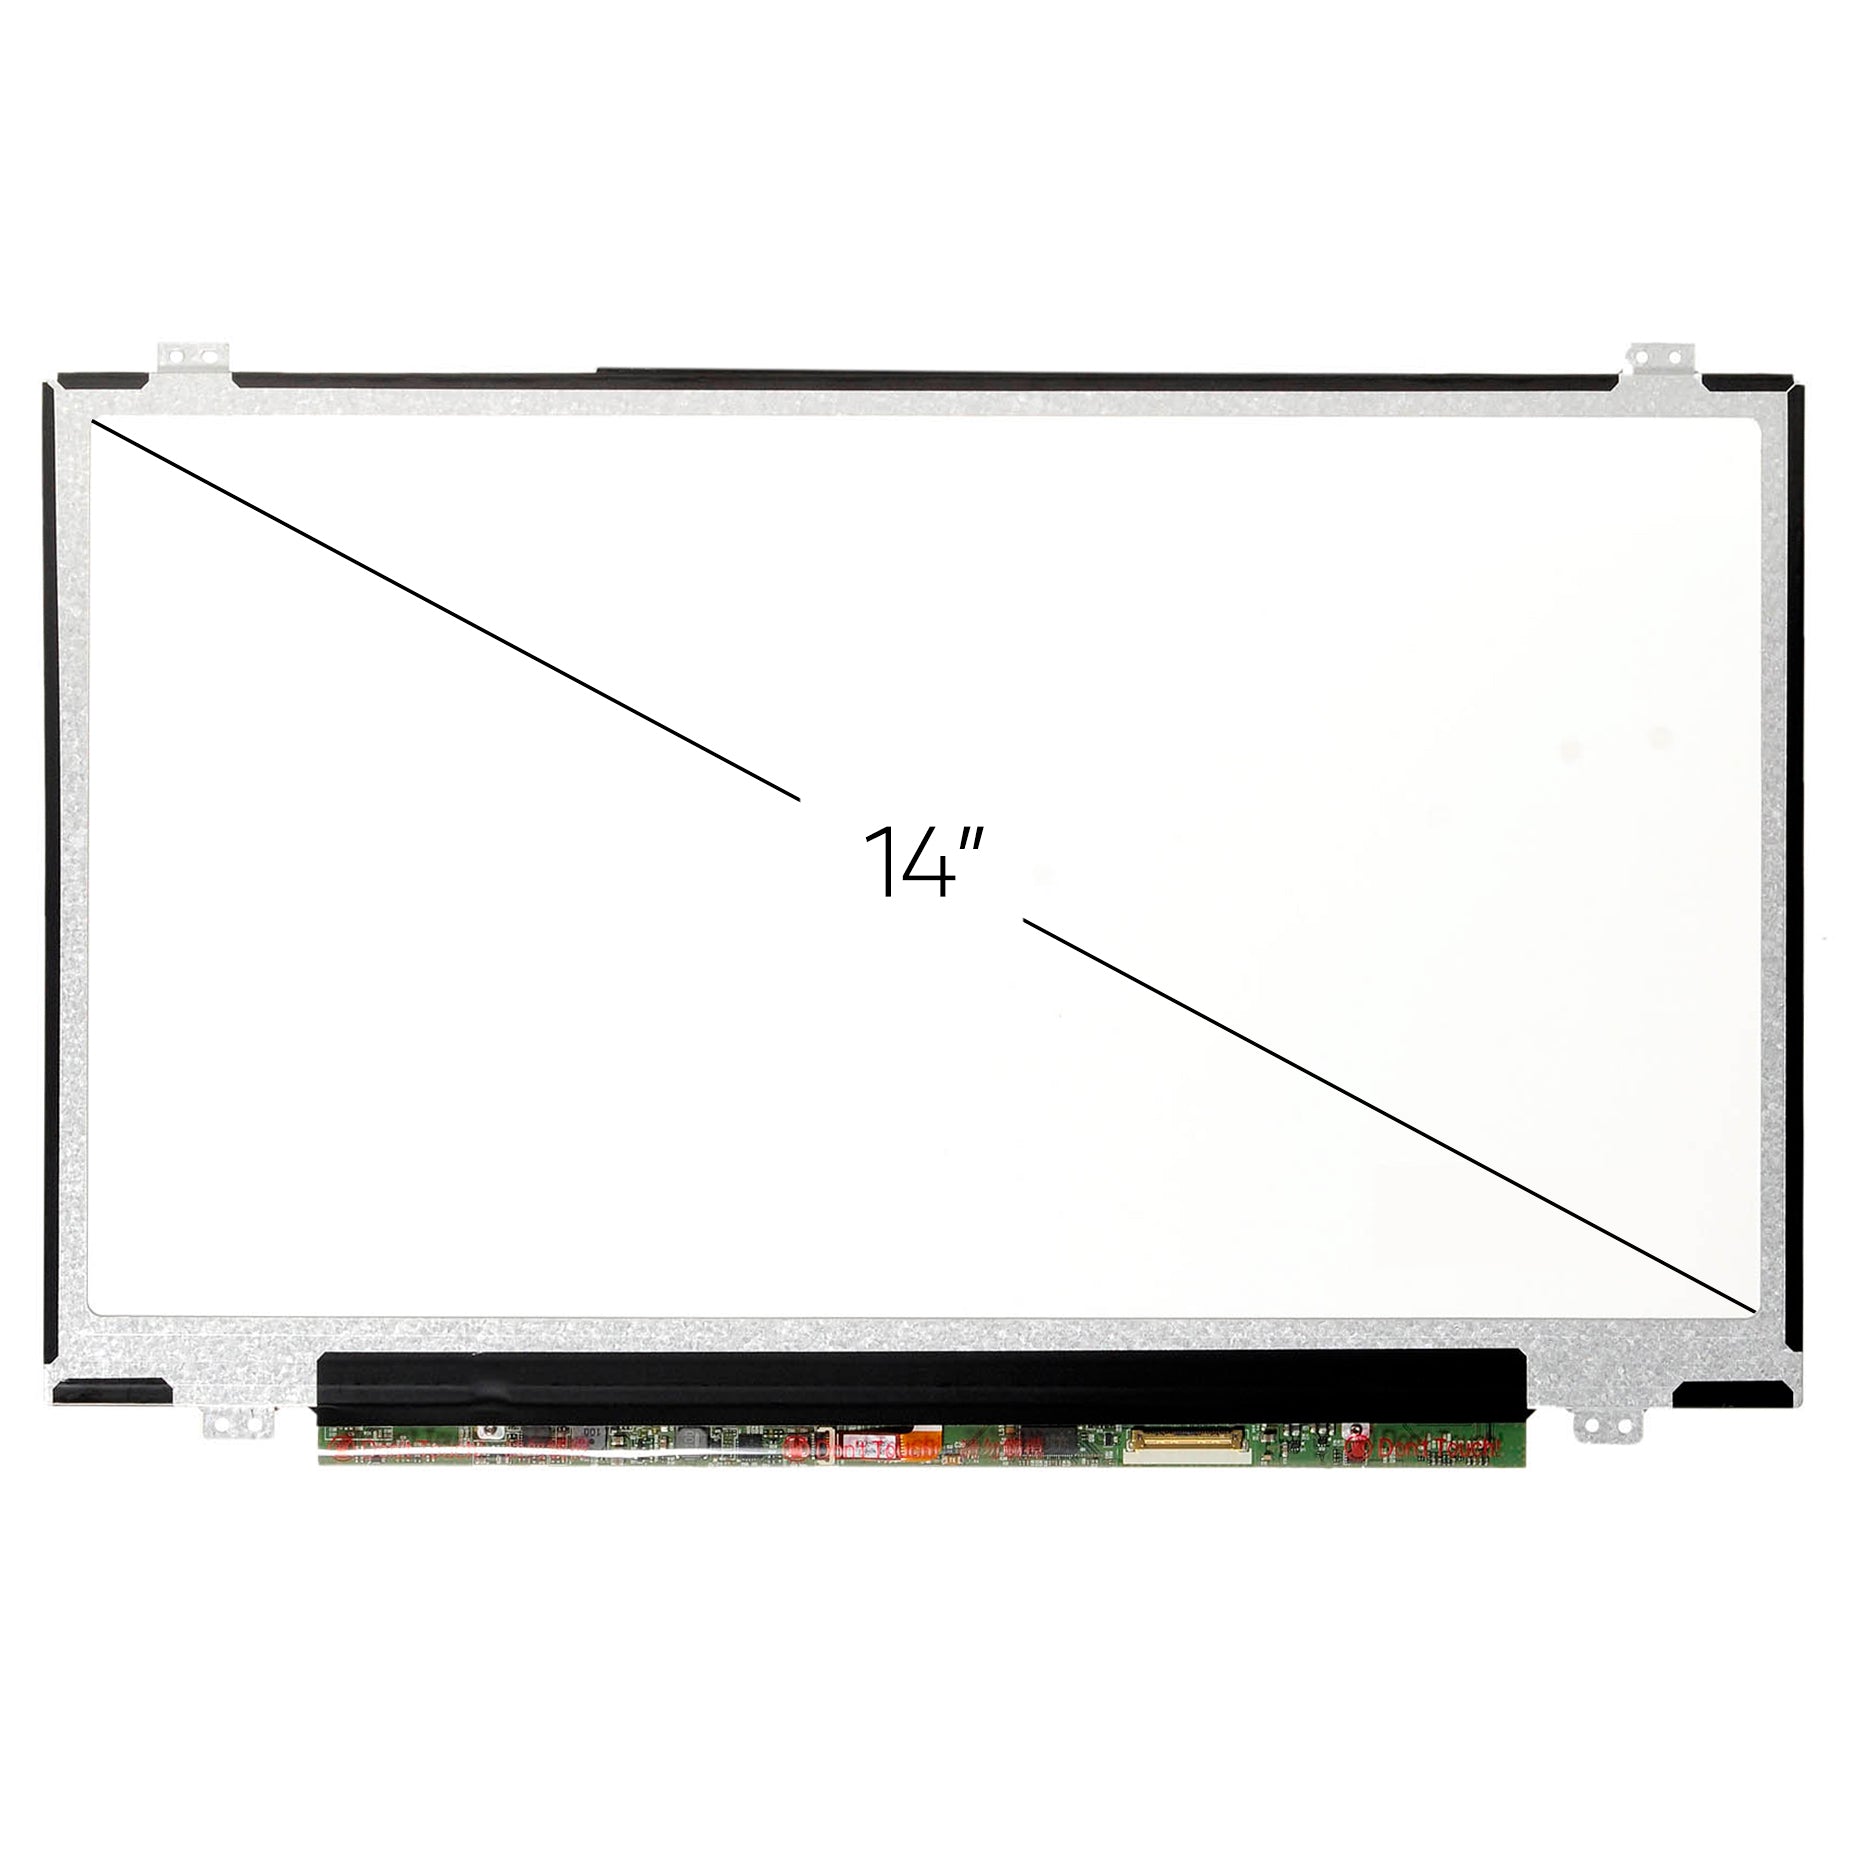 Screen Replacement for Lenovo FRU 01HW839 FHD 1920x1080 IPS Matte LCD LED Display